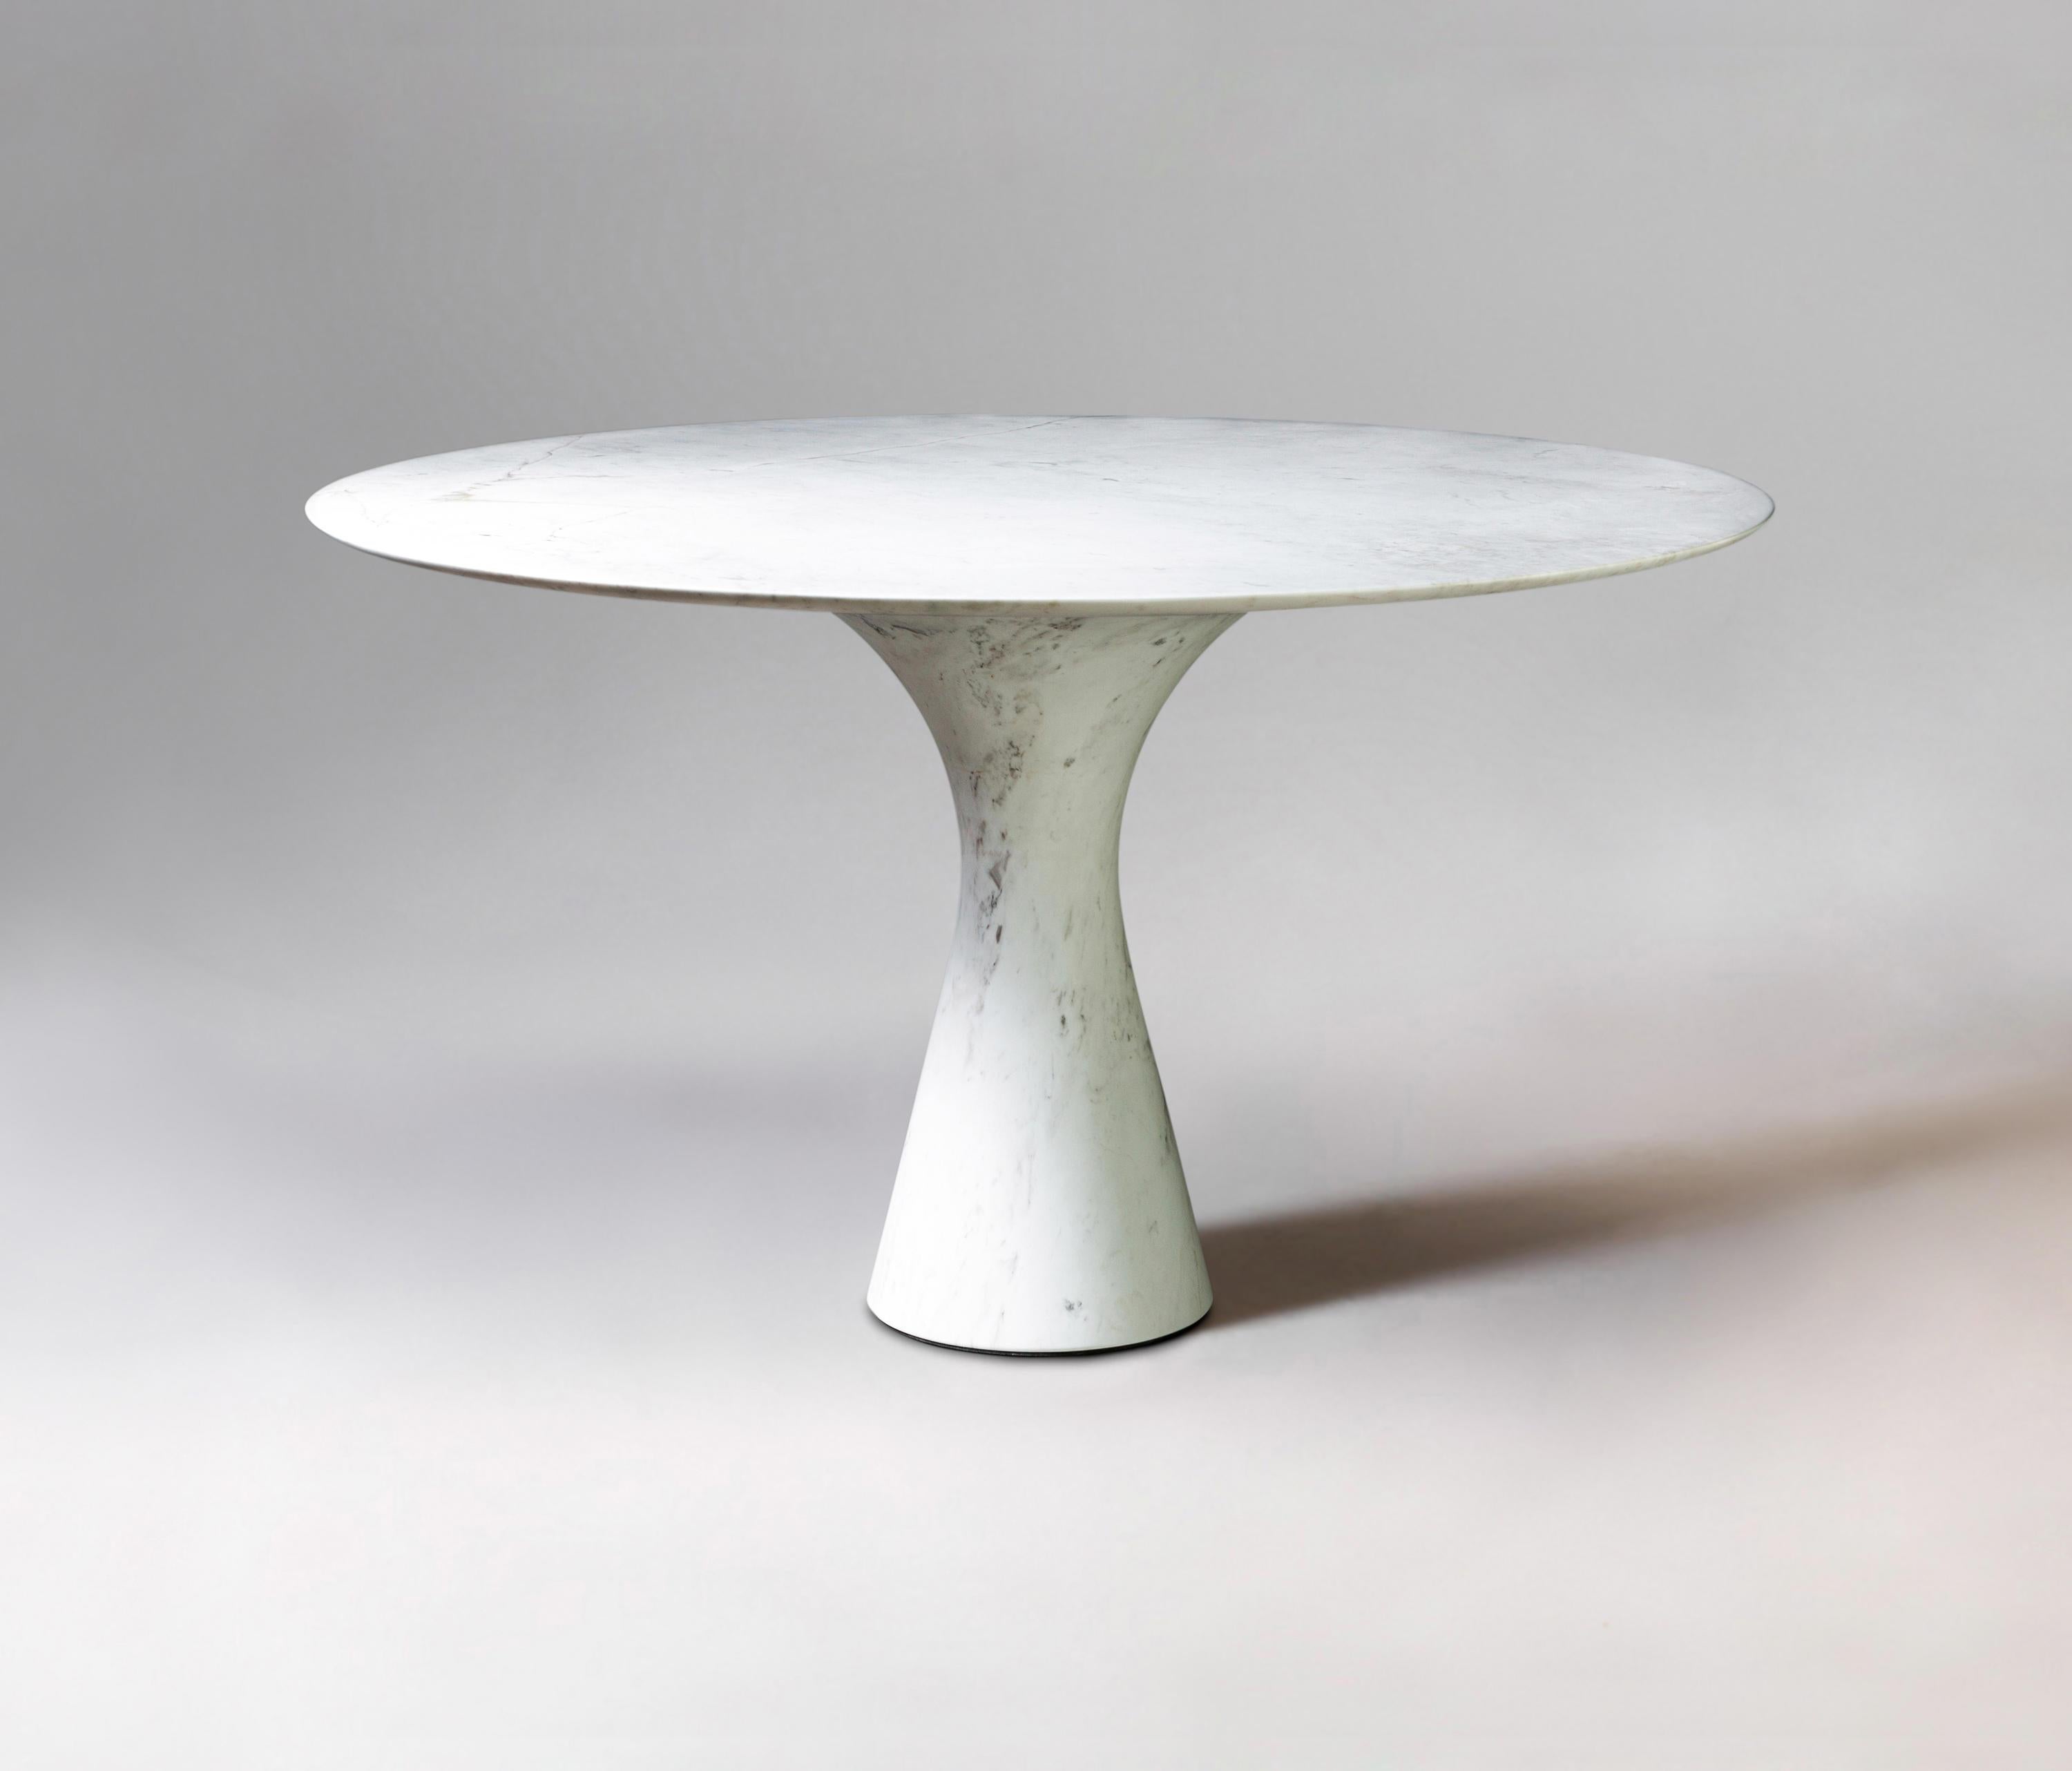 Kynos Refined Contemporary Marble Dining Table 180/75
Dimensions: 180 x 75 cm
Materials: Kynos Marble

Angelo is the essence of a round table in natural stone, a sculptural shape in robust material with elegant lines and refined finishes.

The